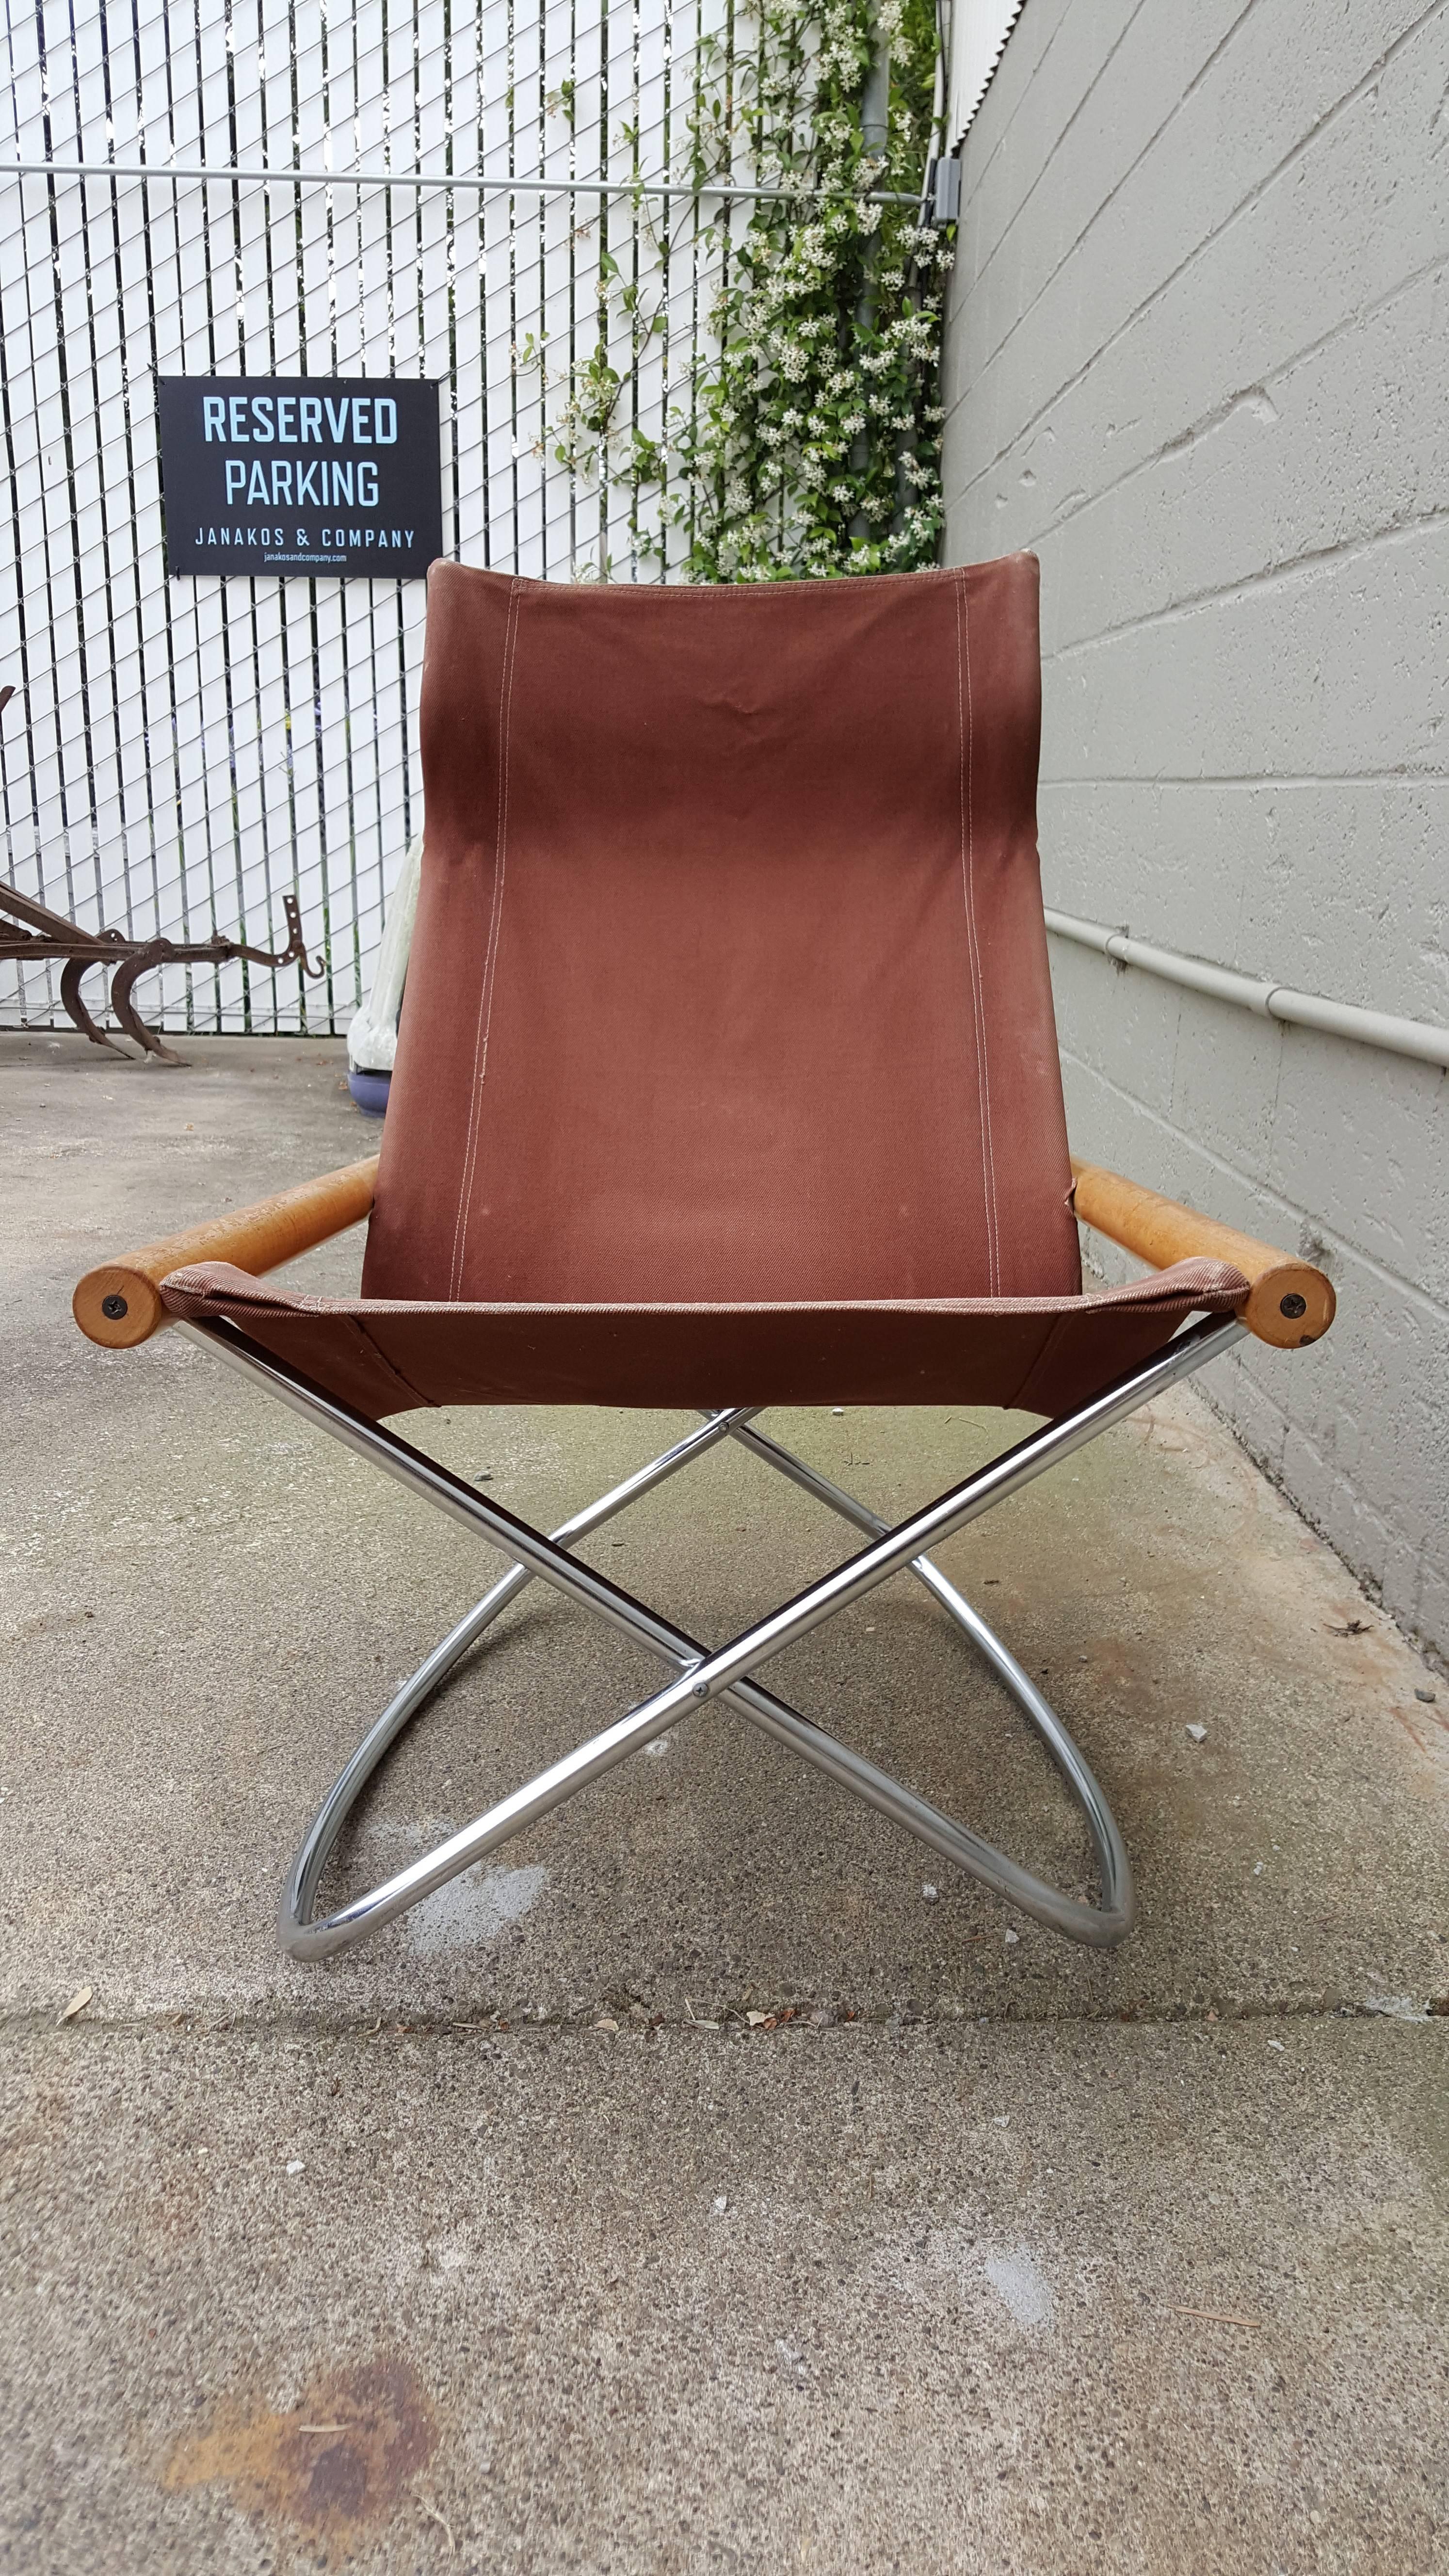 A Japanese modernist design strongly influenced by the Scandinavian Mid-Century movement. The ergonomic design of this chair provides optimal comfort. A canvas sling seat over a tubular steel chrome frame that easily folds in half. This chair was